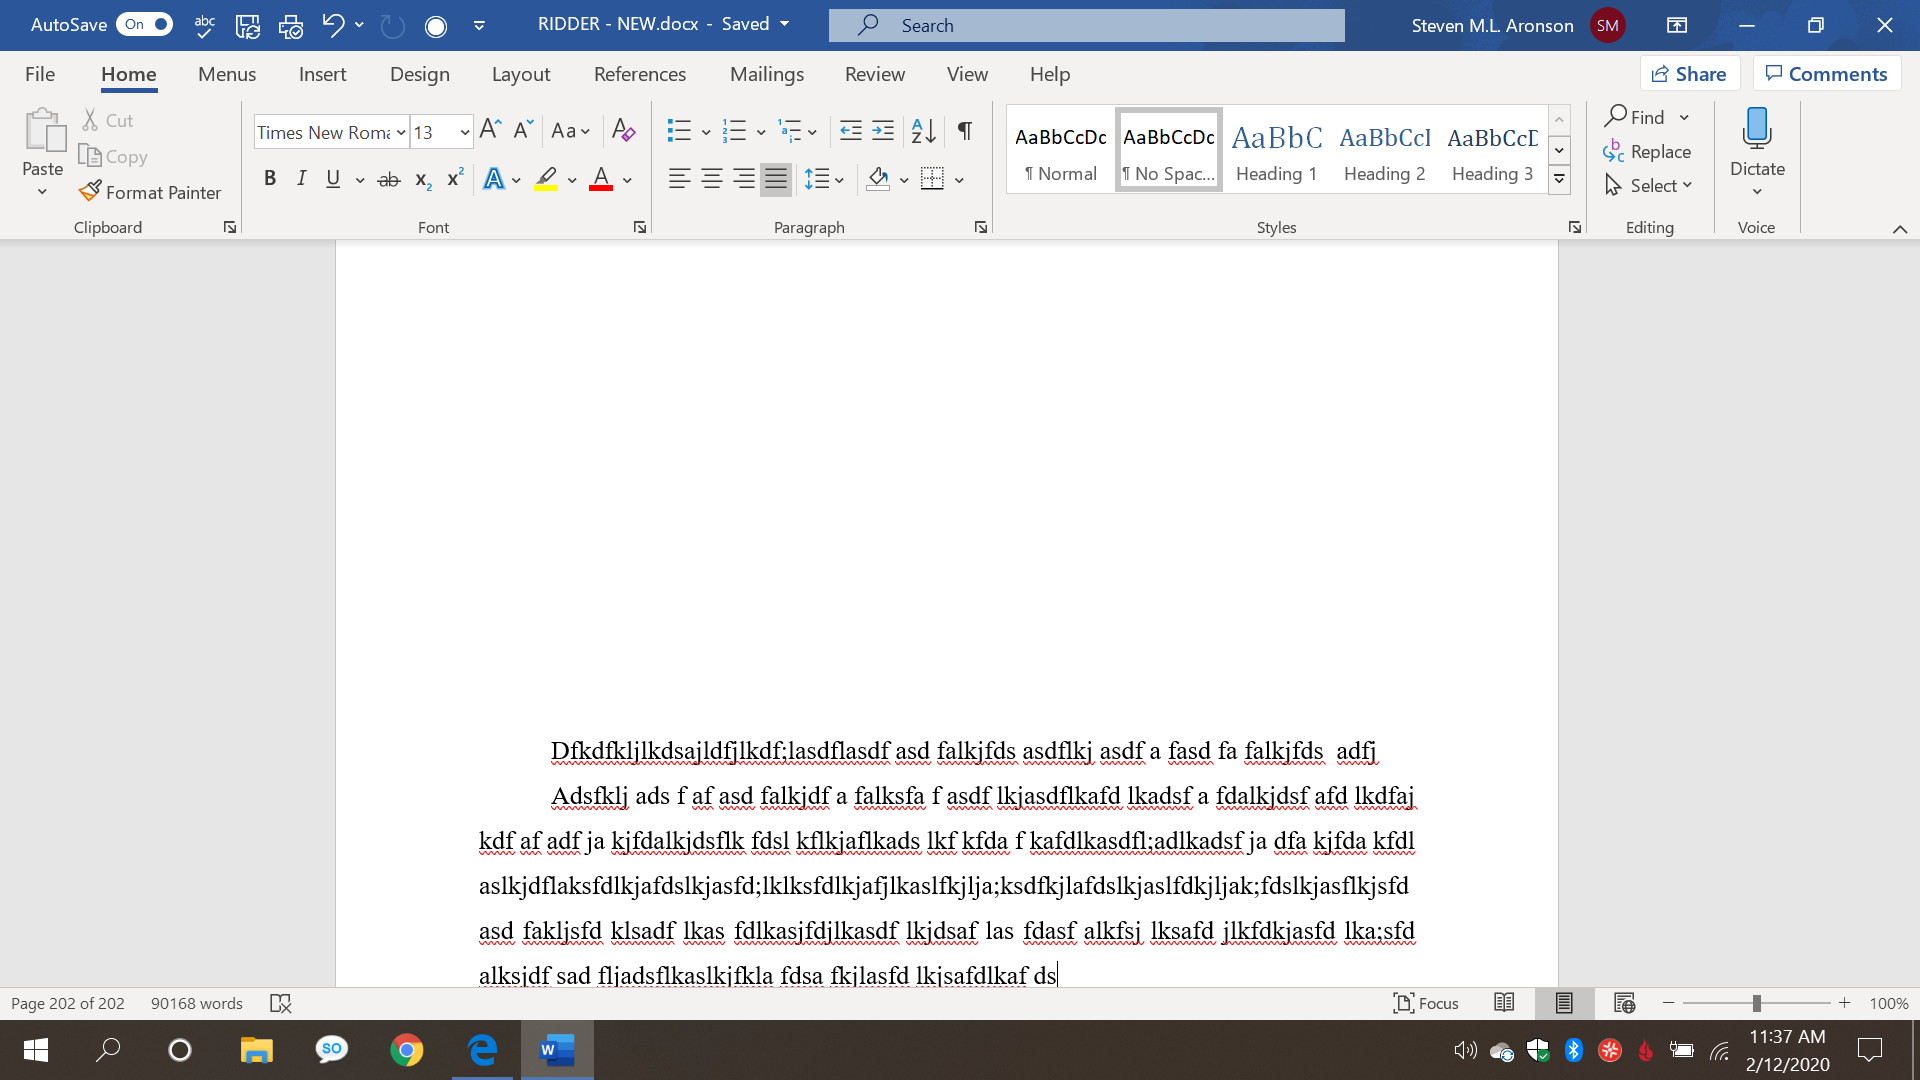 MS Word - Forces me to write at the bottom of the page so that